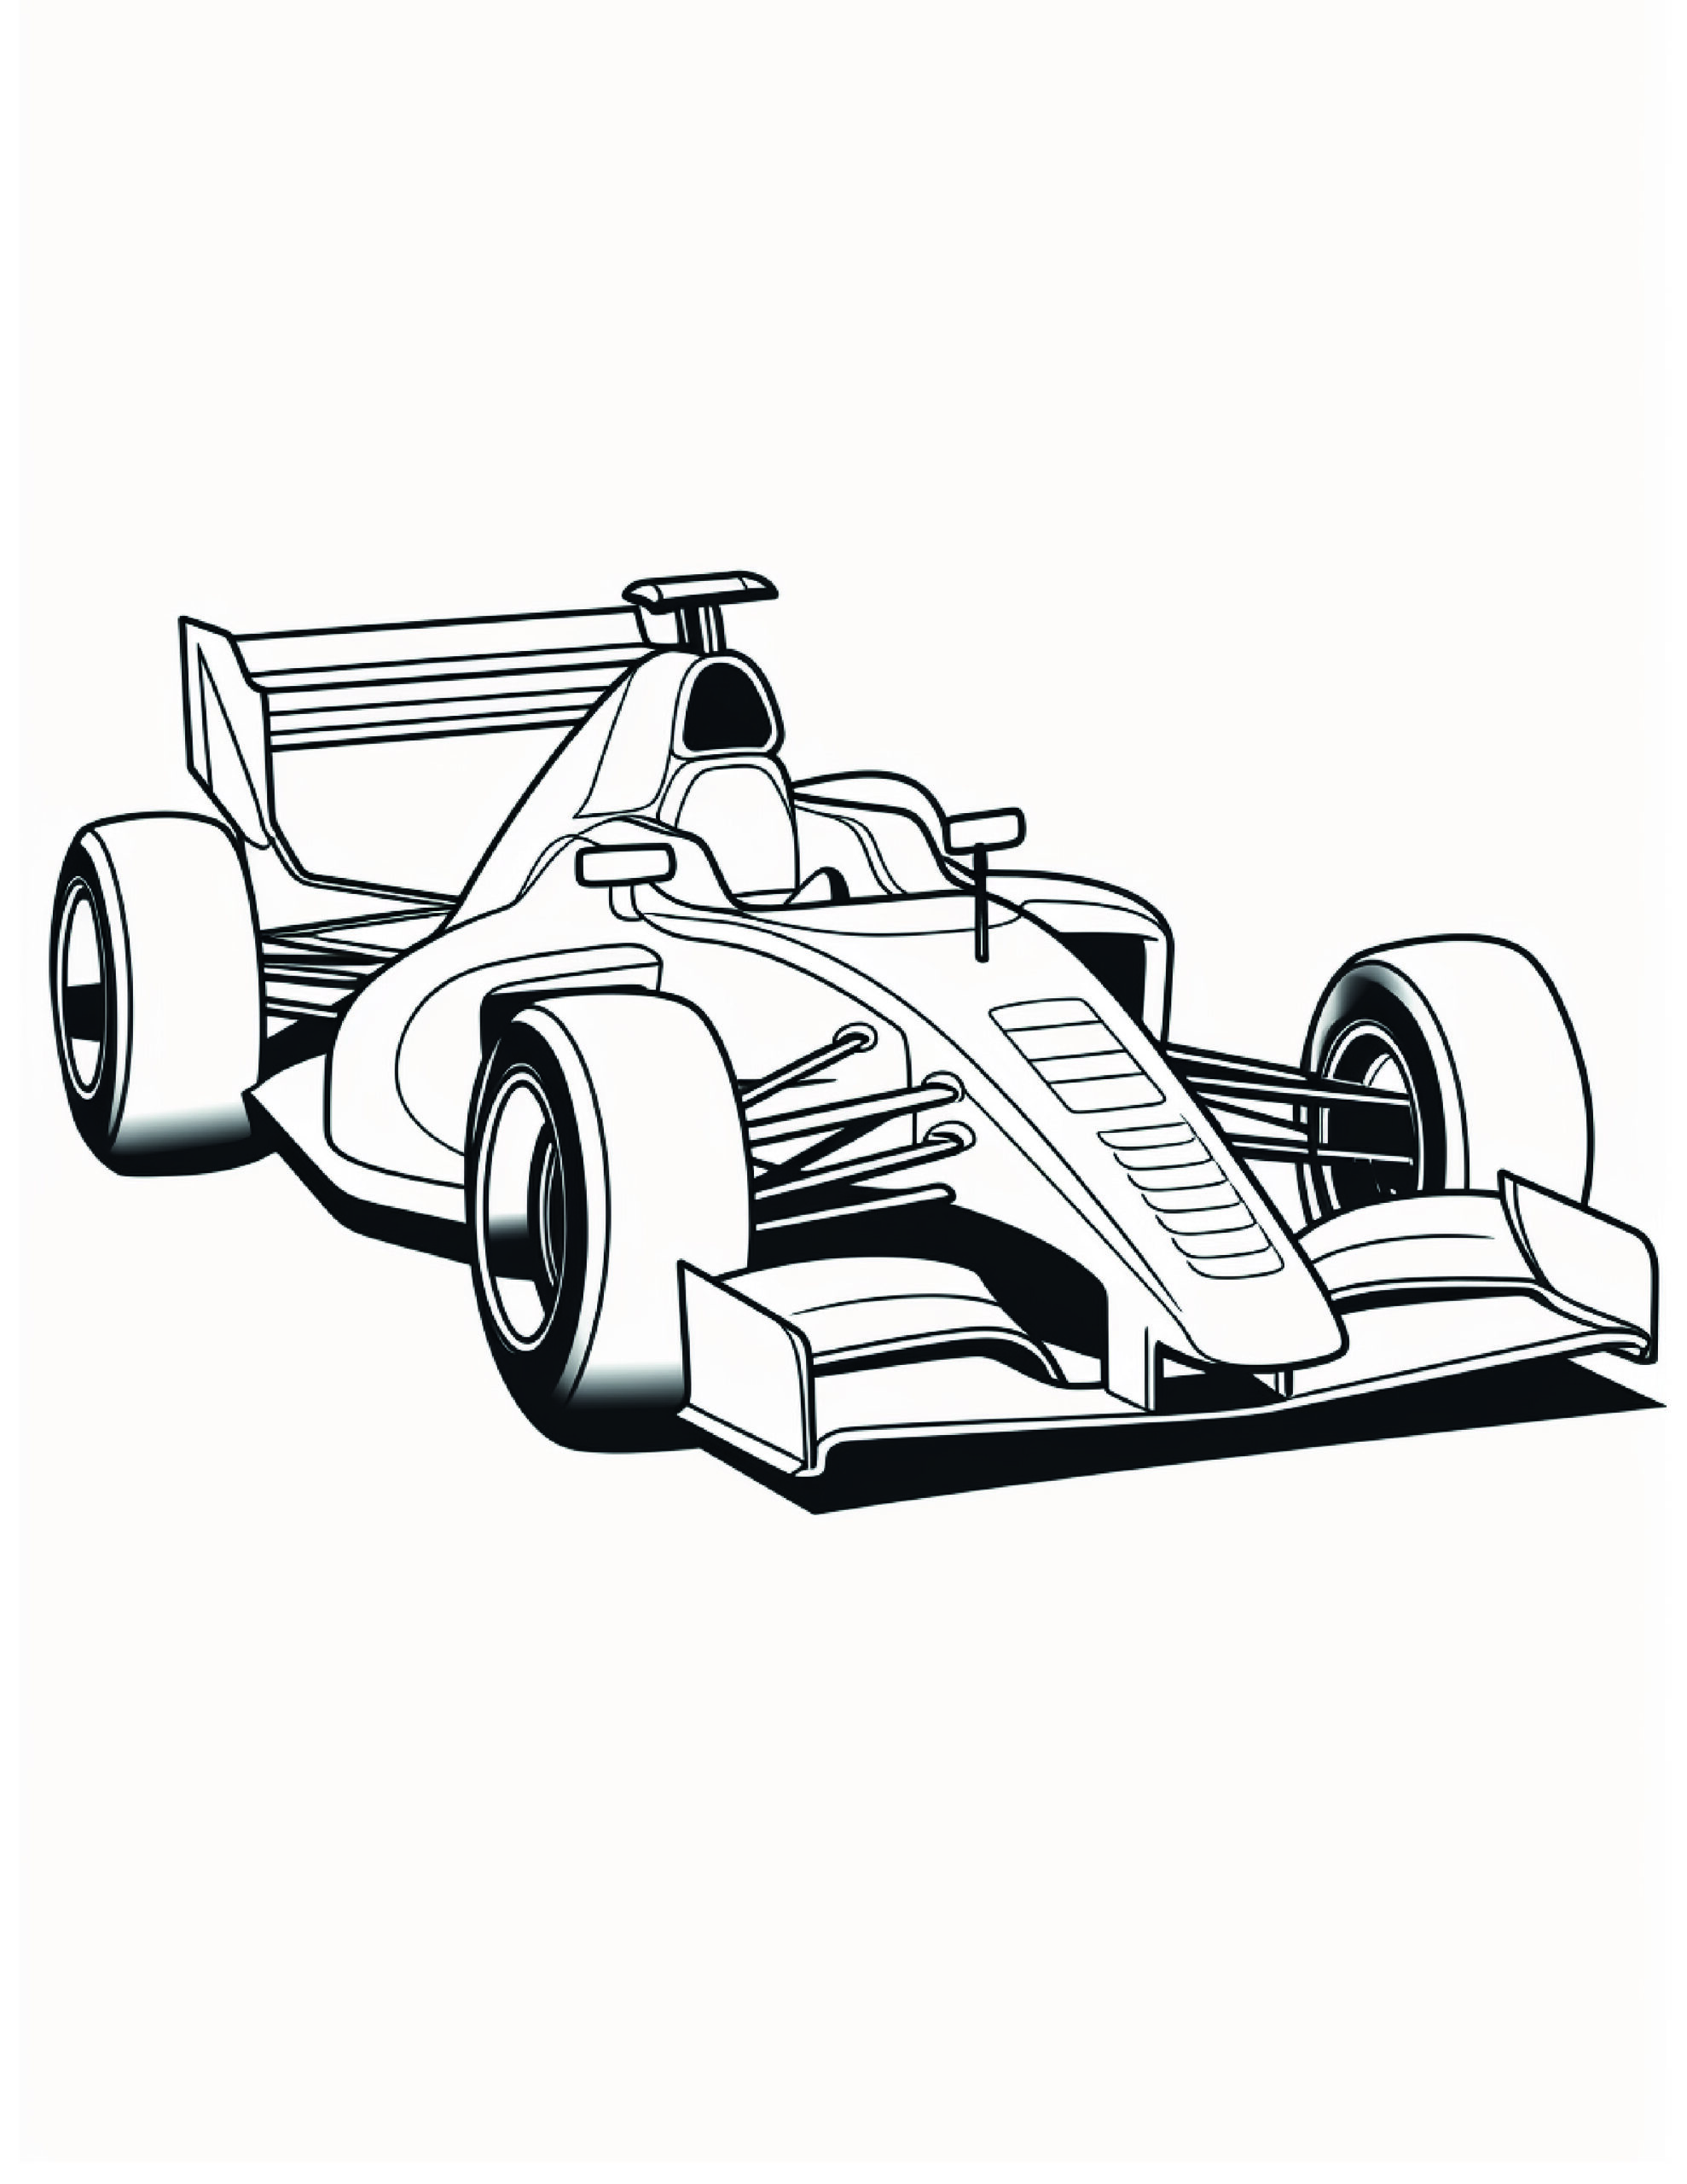 Race Car Coloring Page 11 - A line drawing of a formula one car with streamlined body.